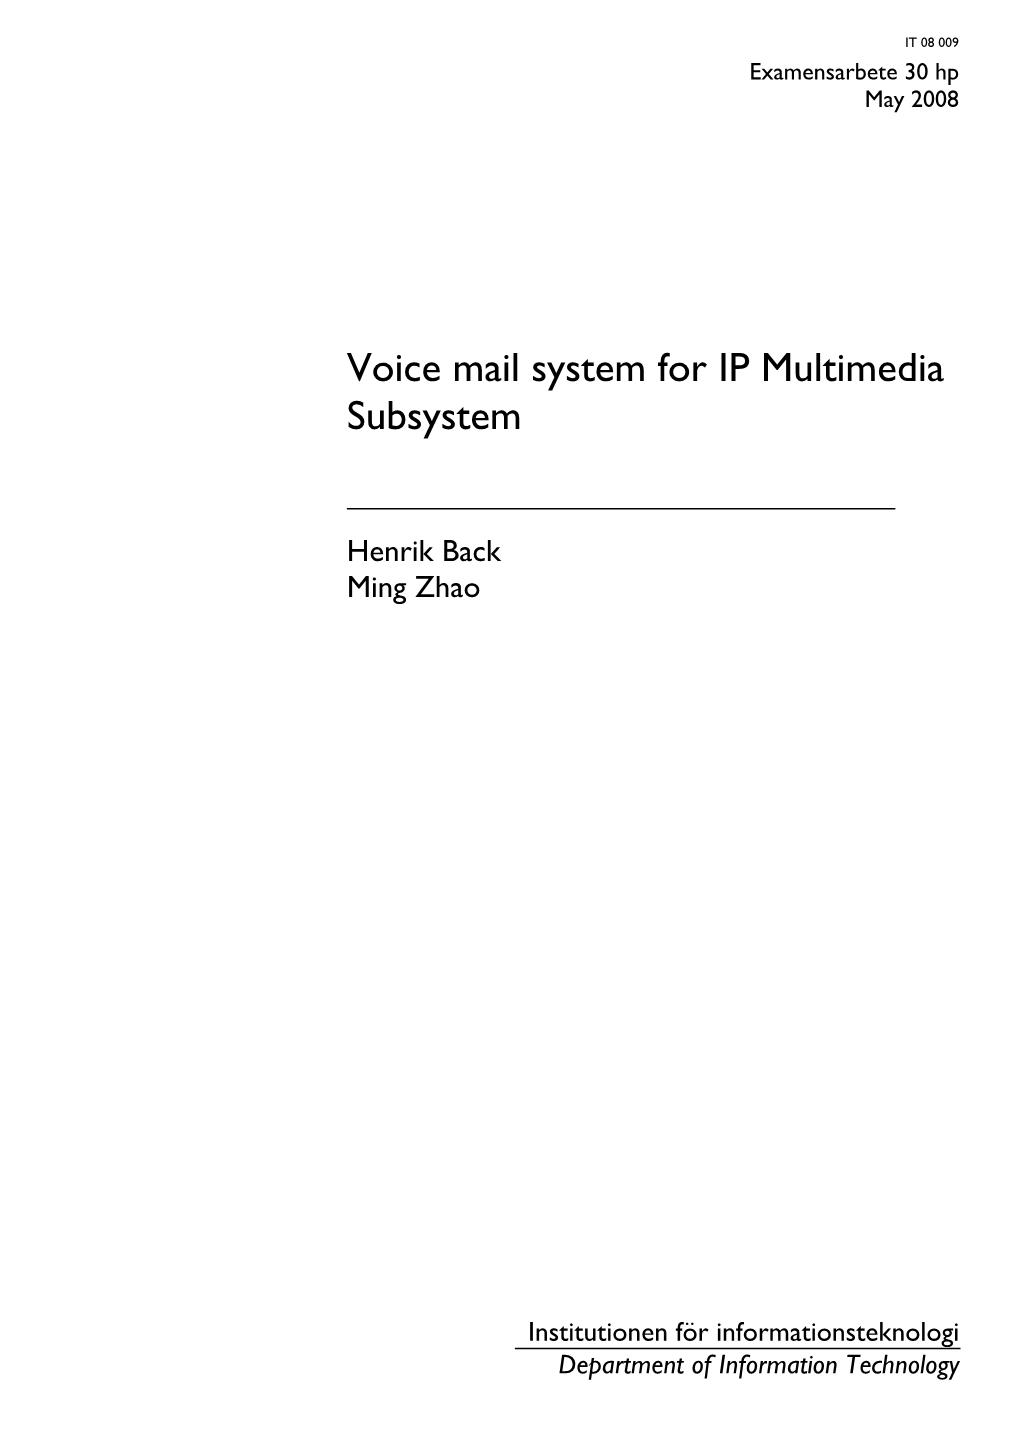 Voice Mail System for IP Multimedia Subsystem